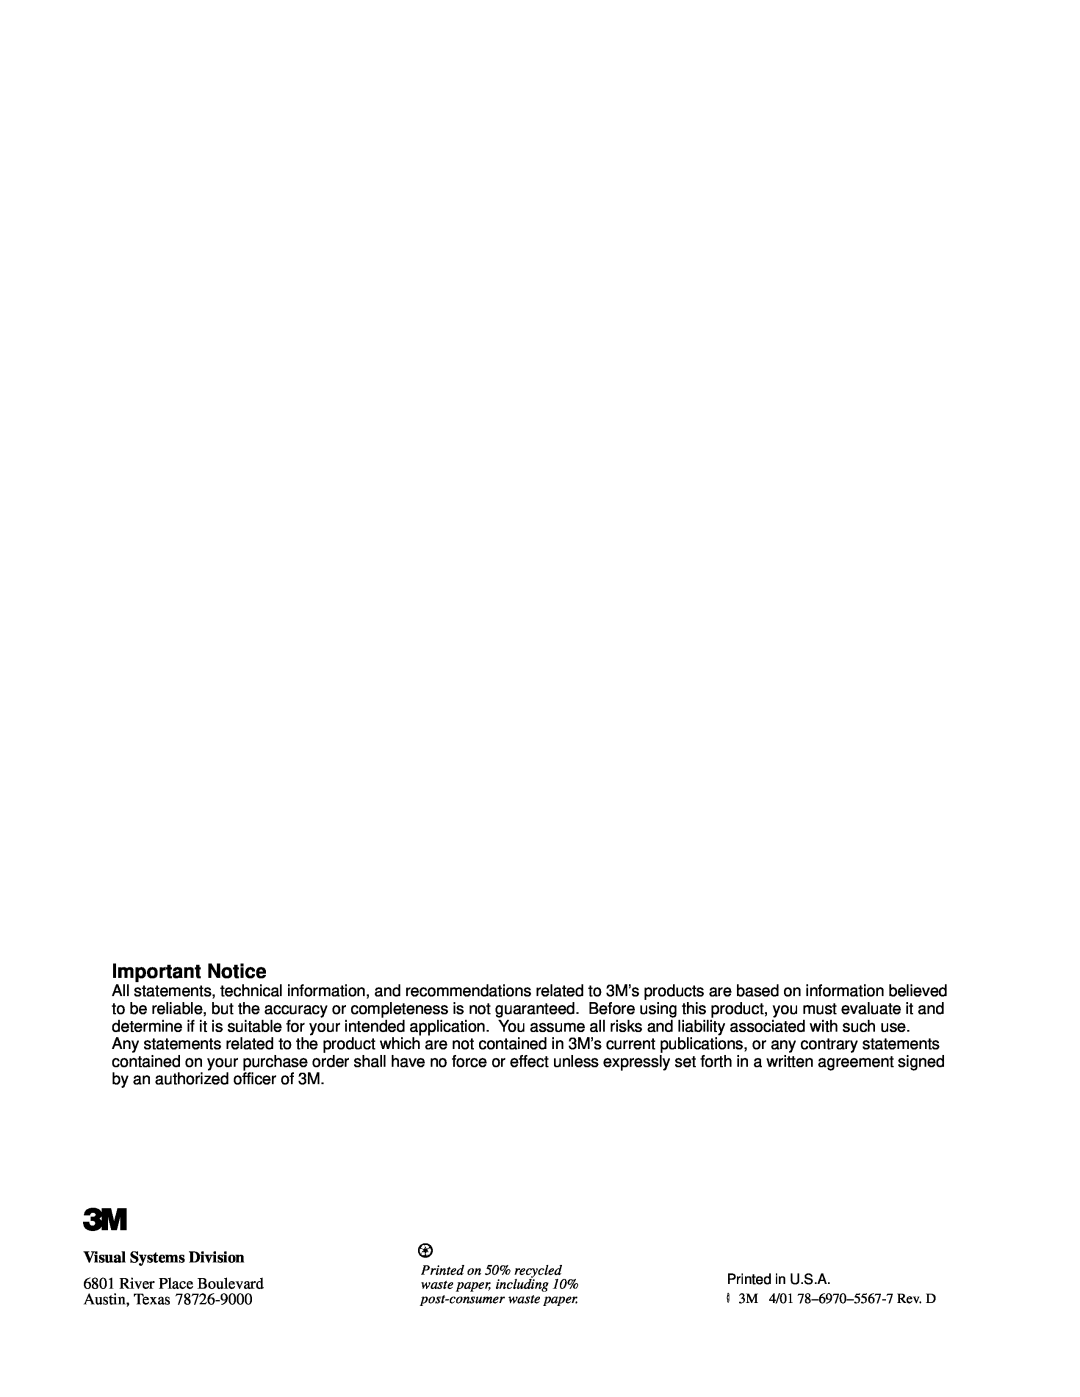 3M 9800 manual Important Notice, Visual Systems Division 